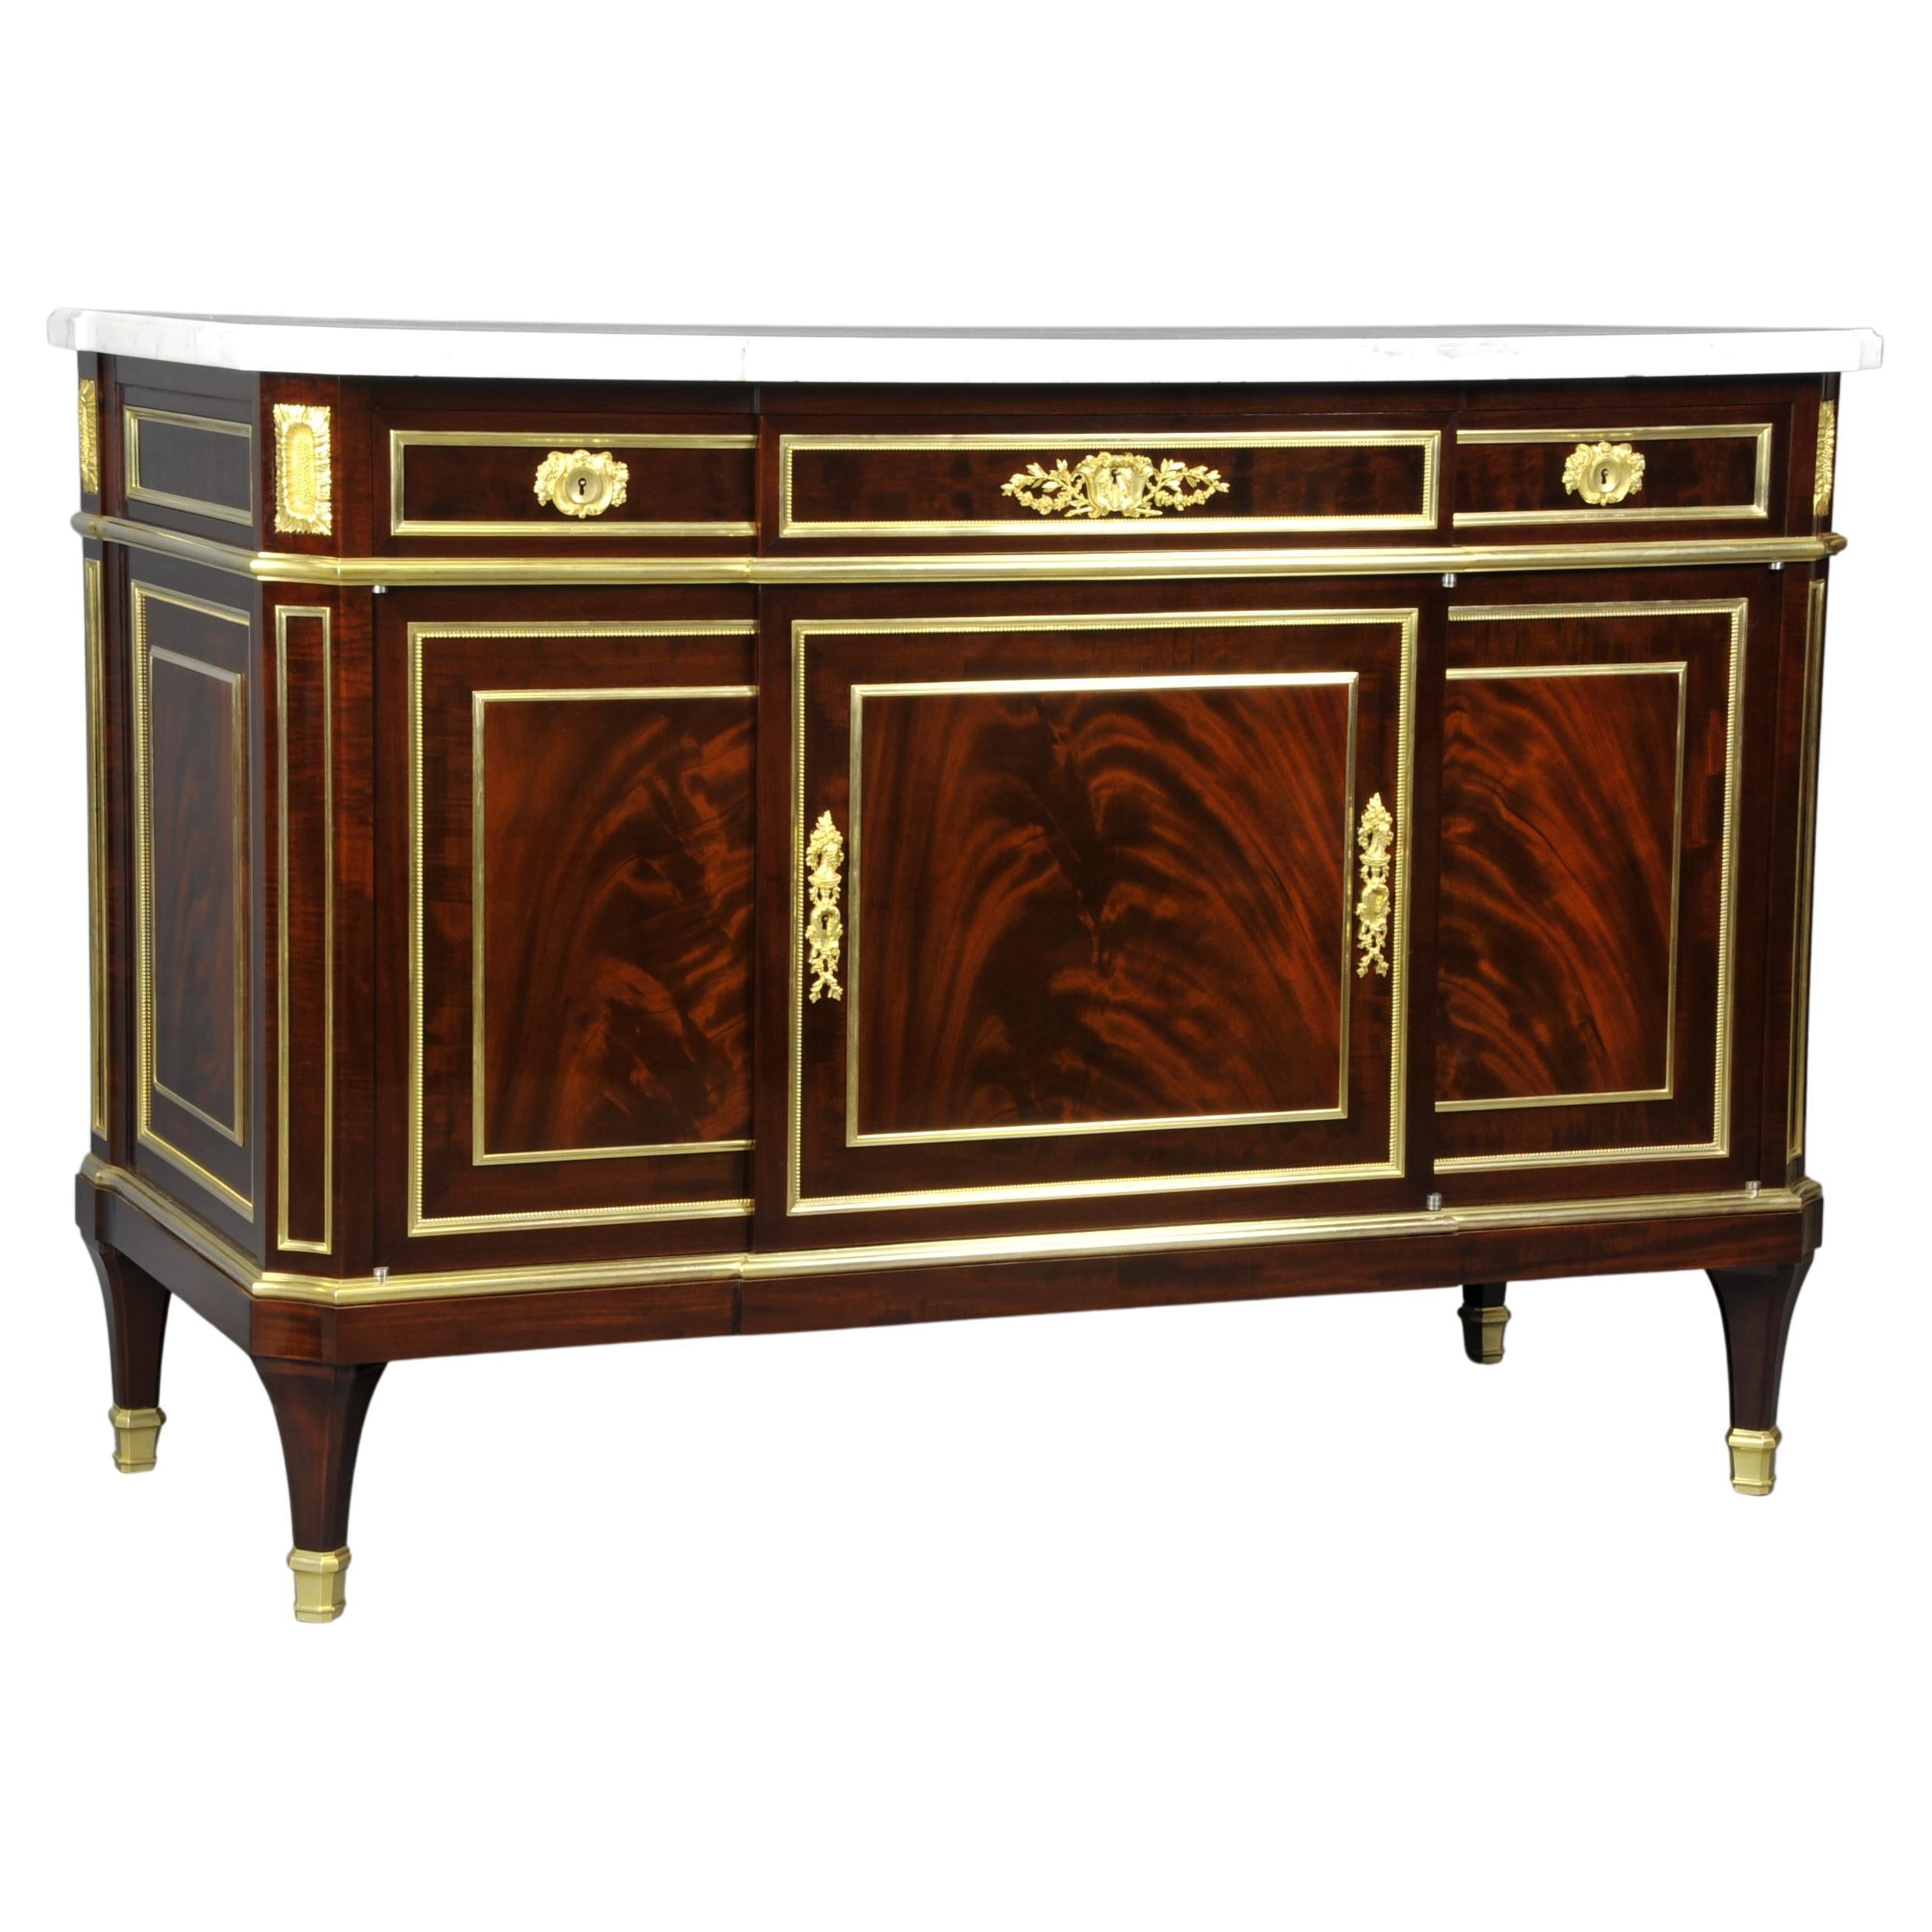 Exceptional commode in mahogany and flamed mahogany veneer opening three doors and three drawers in the belt. Central projection and amounts with concave sides, a beautiful white marble top with light gray veining. Very rich ornamentation of very